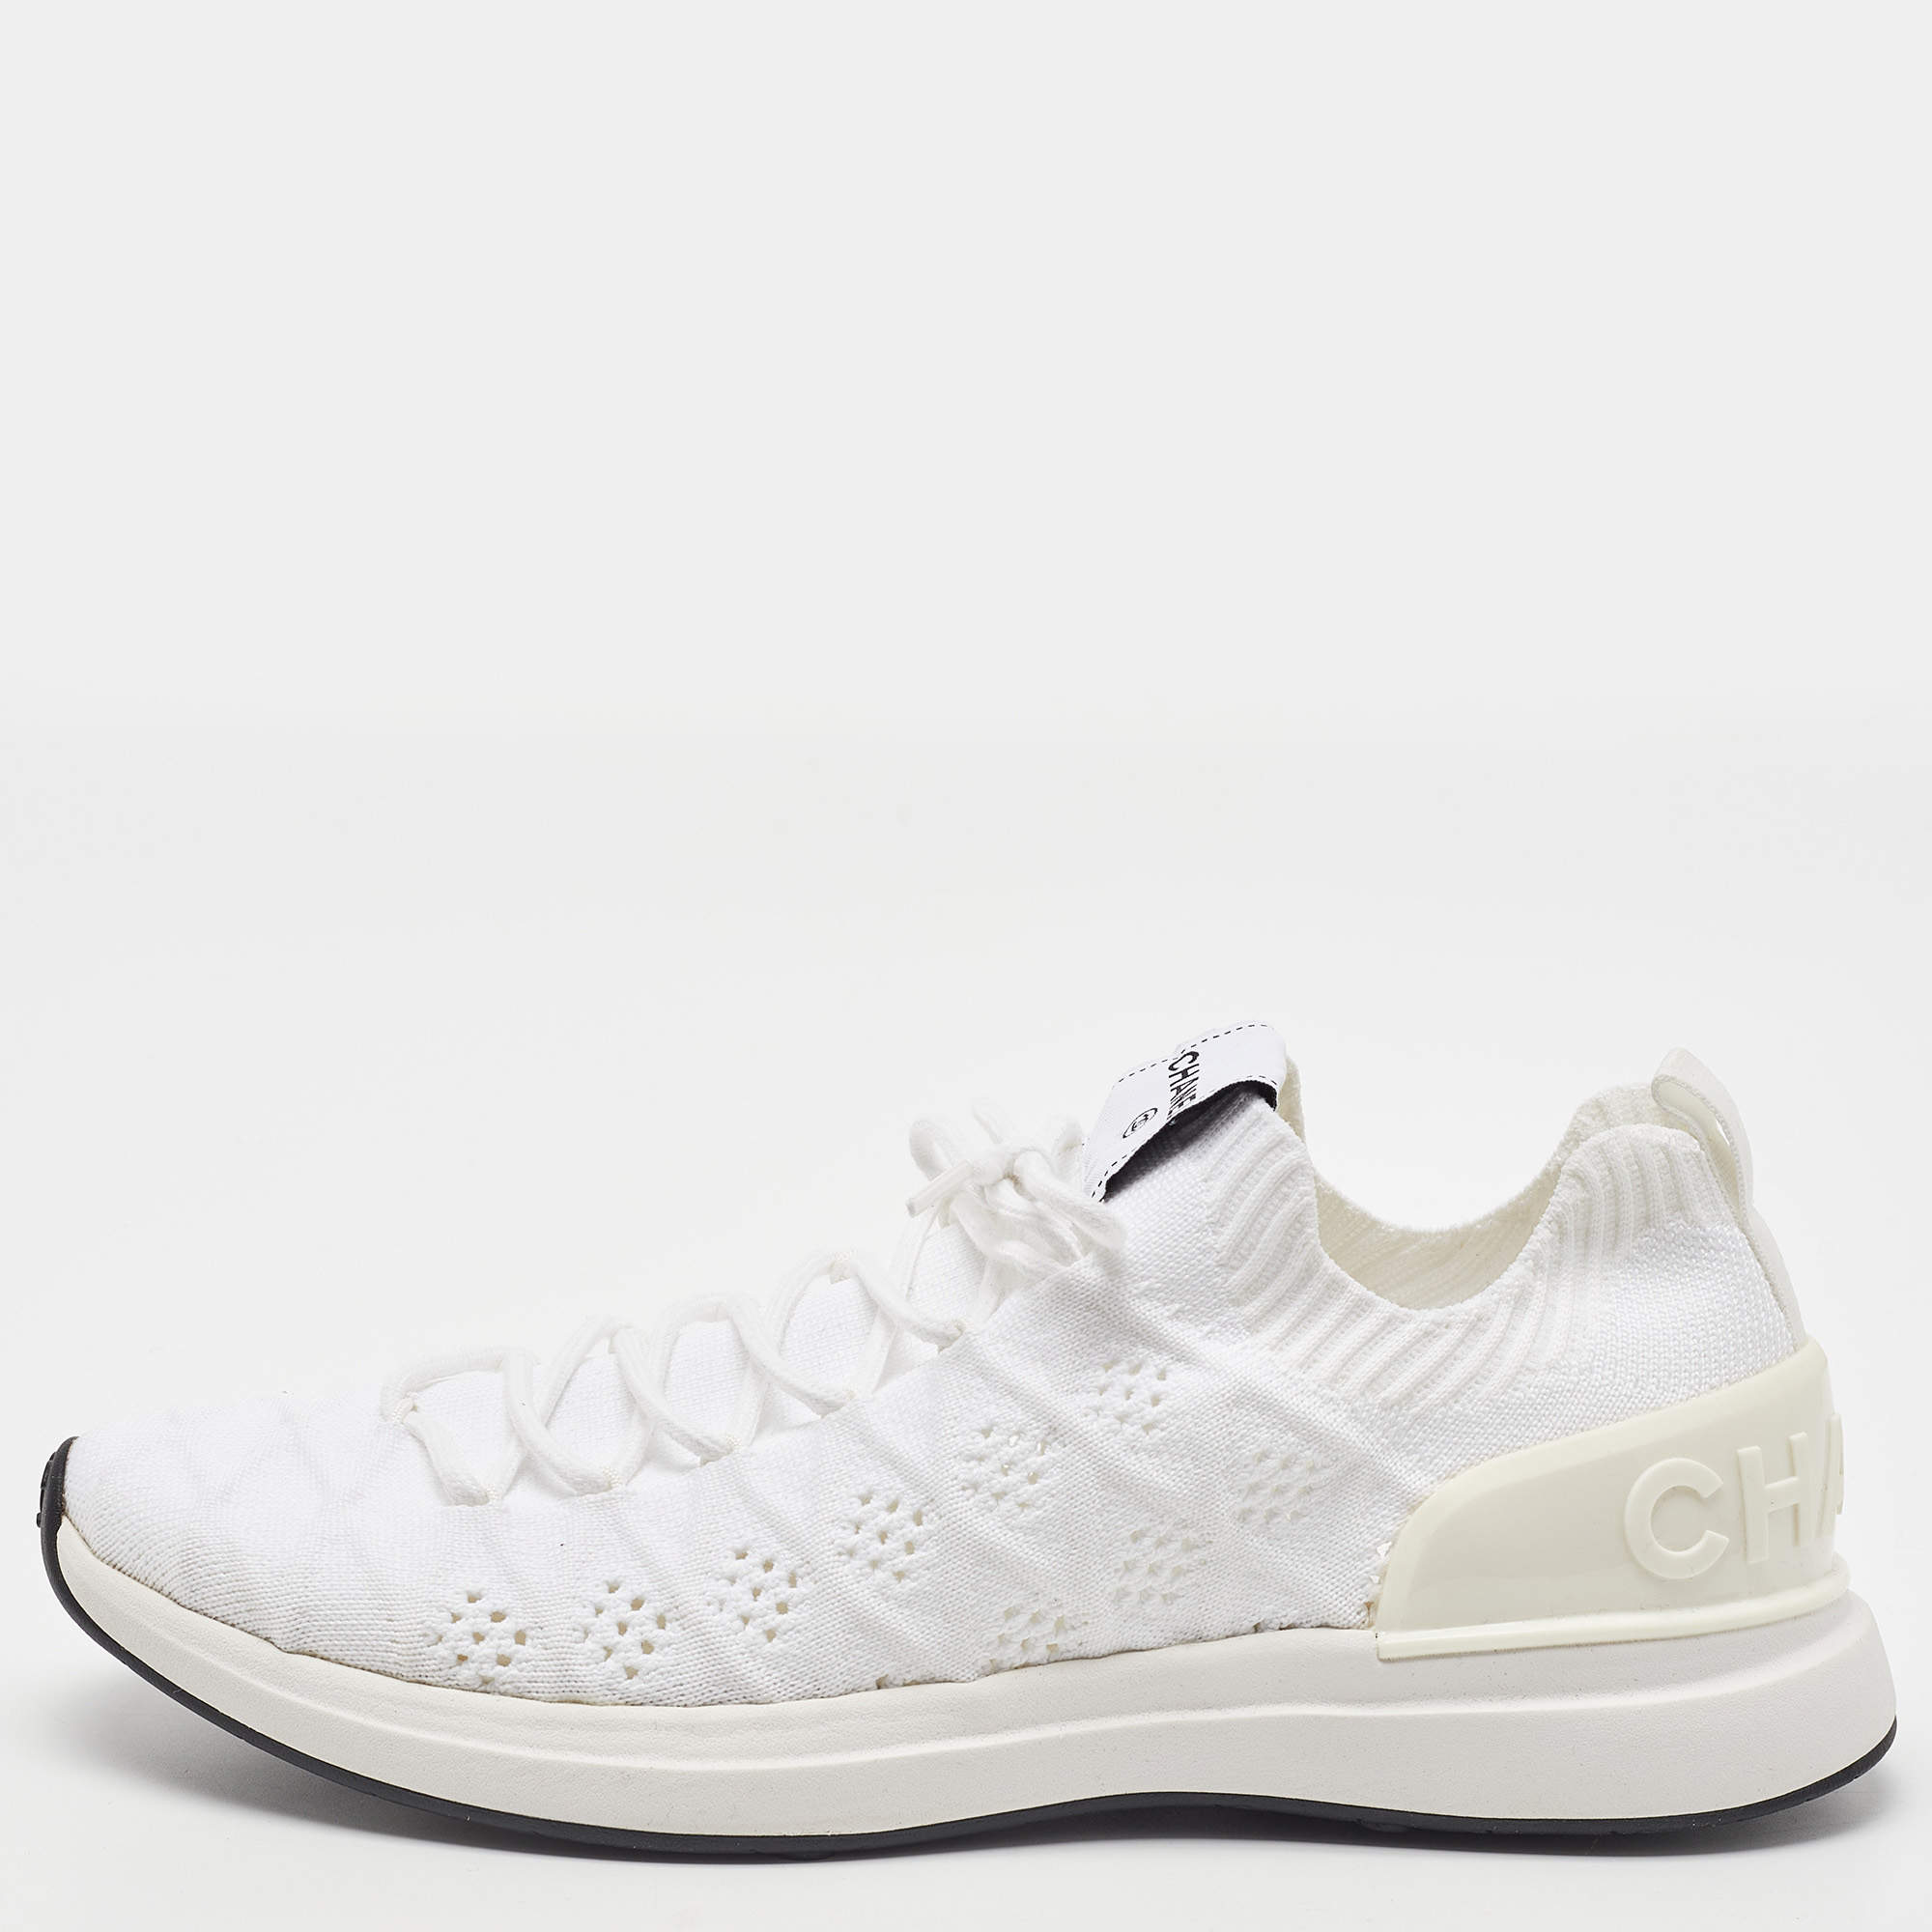 Chanel White Knit Fabric Lace Up Sneakers Size 42